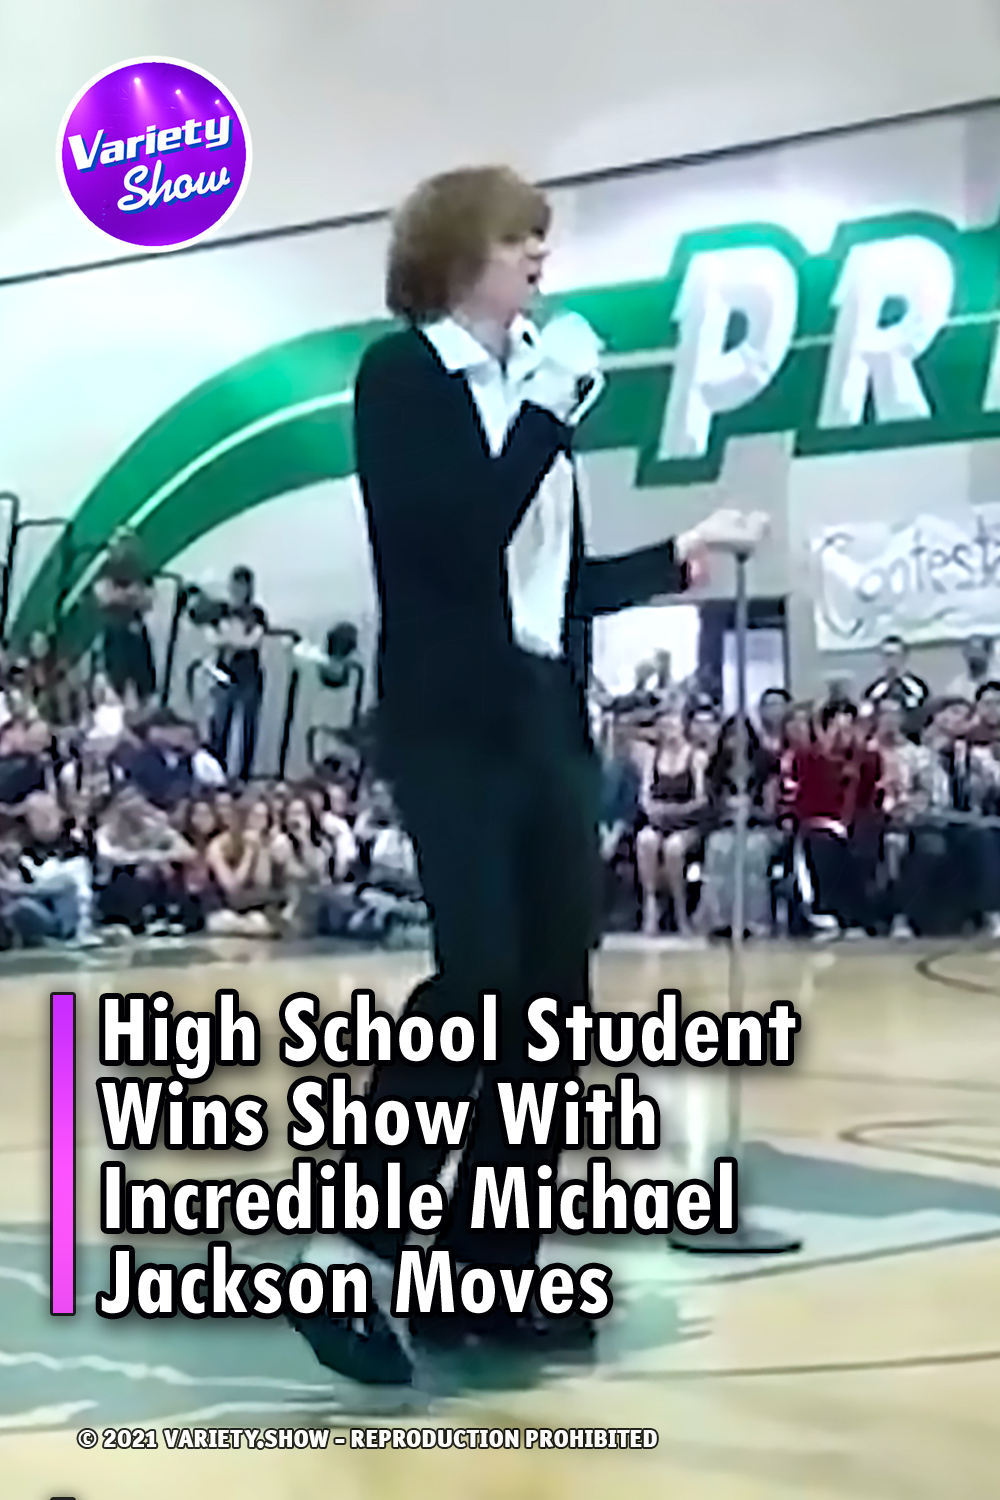 High School Student Wins Show With Incredible Michael Jackson Moves